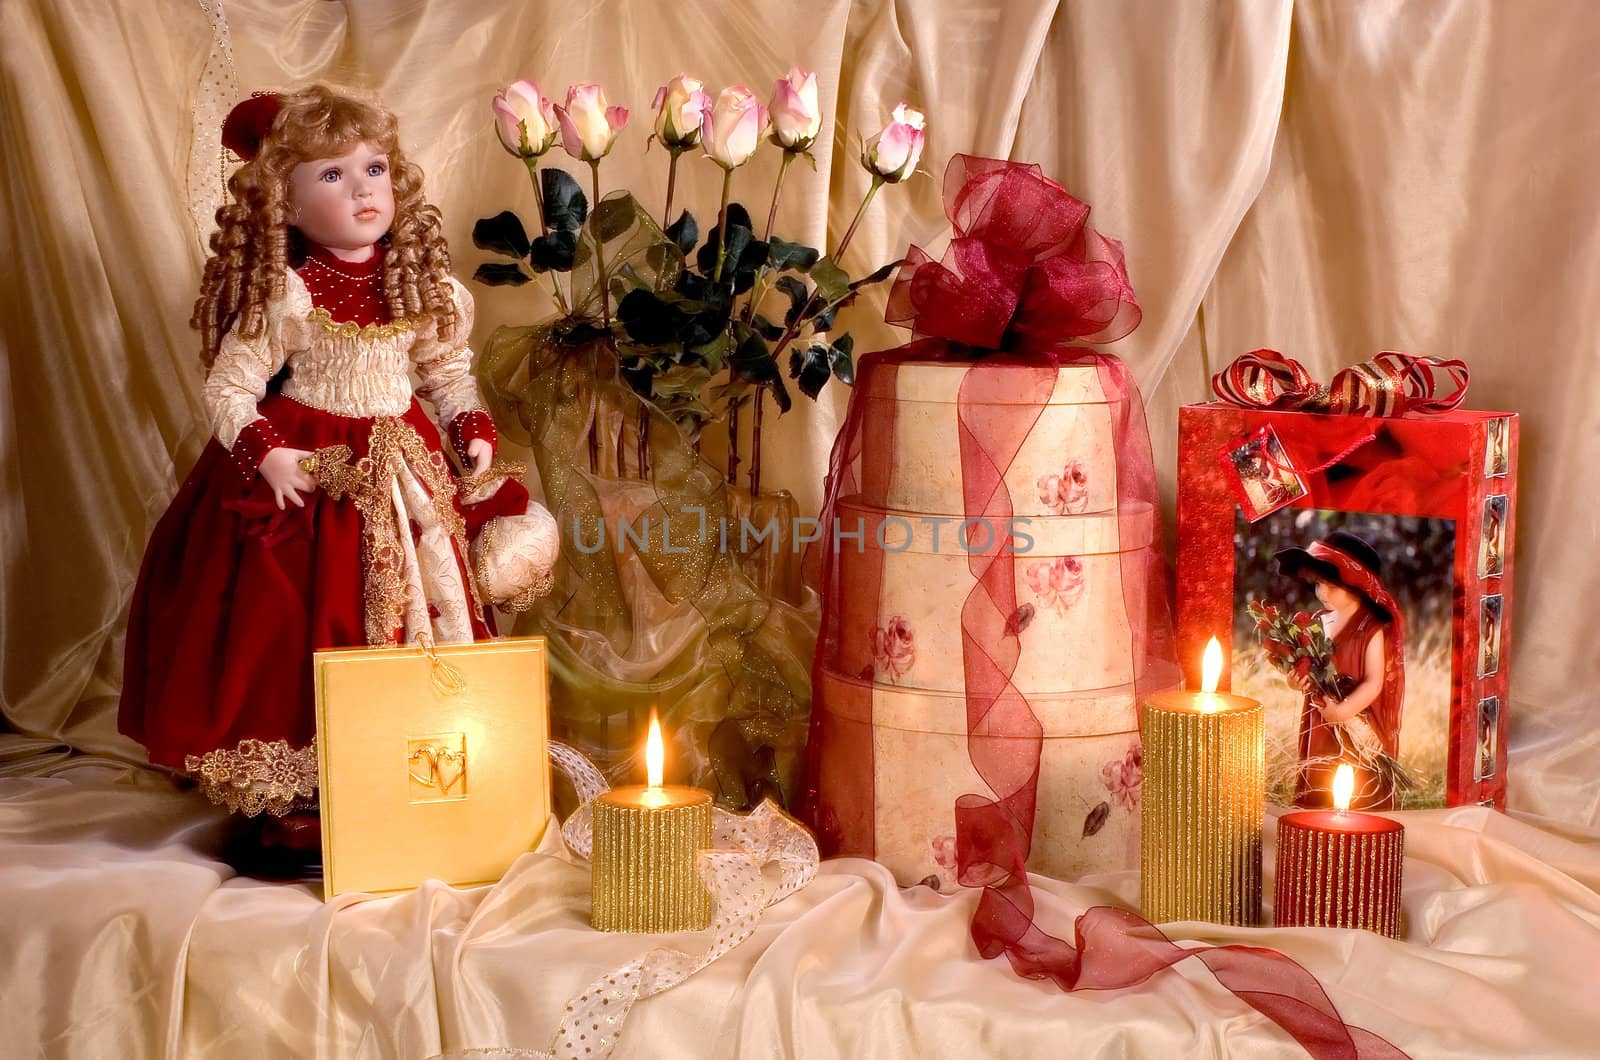 Still-life with gifts, a doll and a bouquet of roses